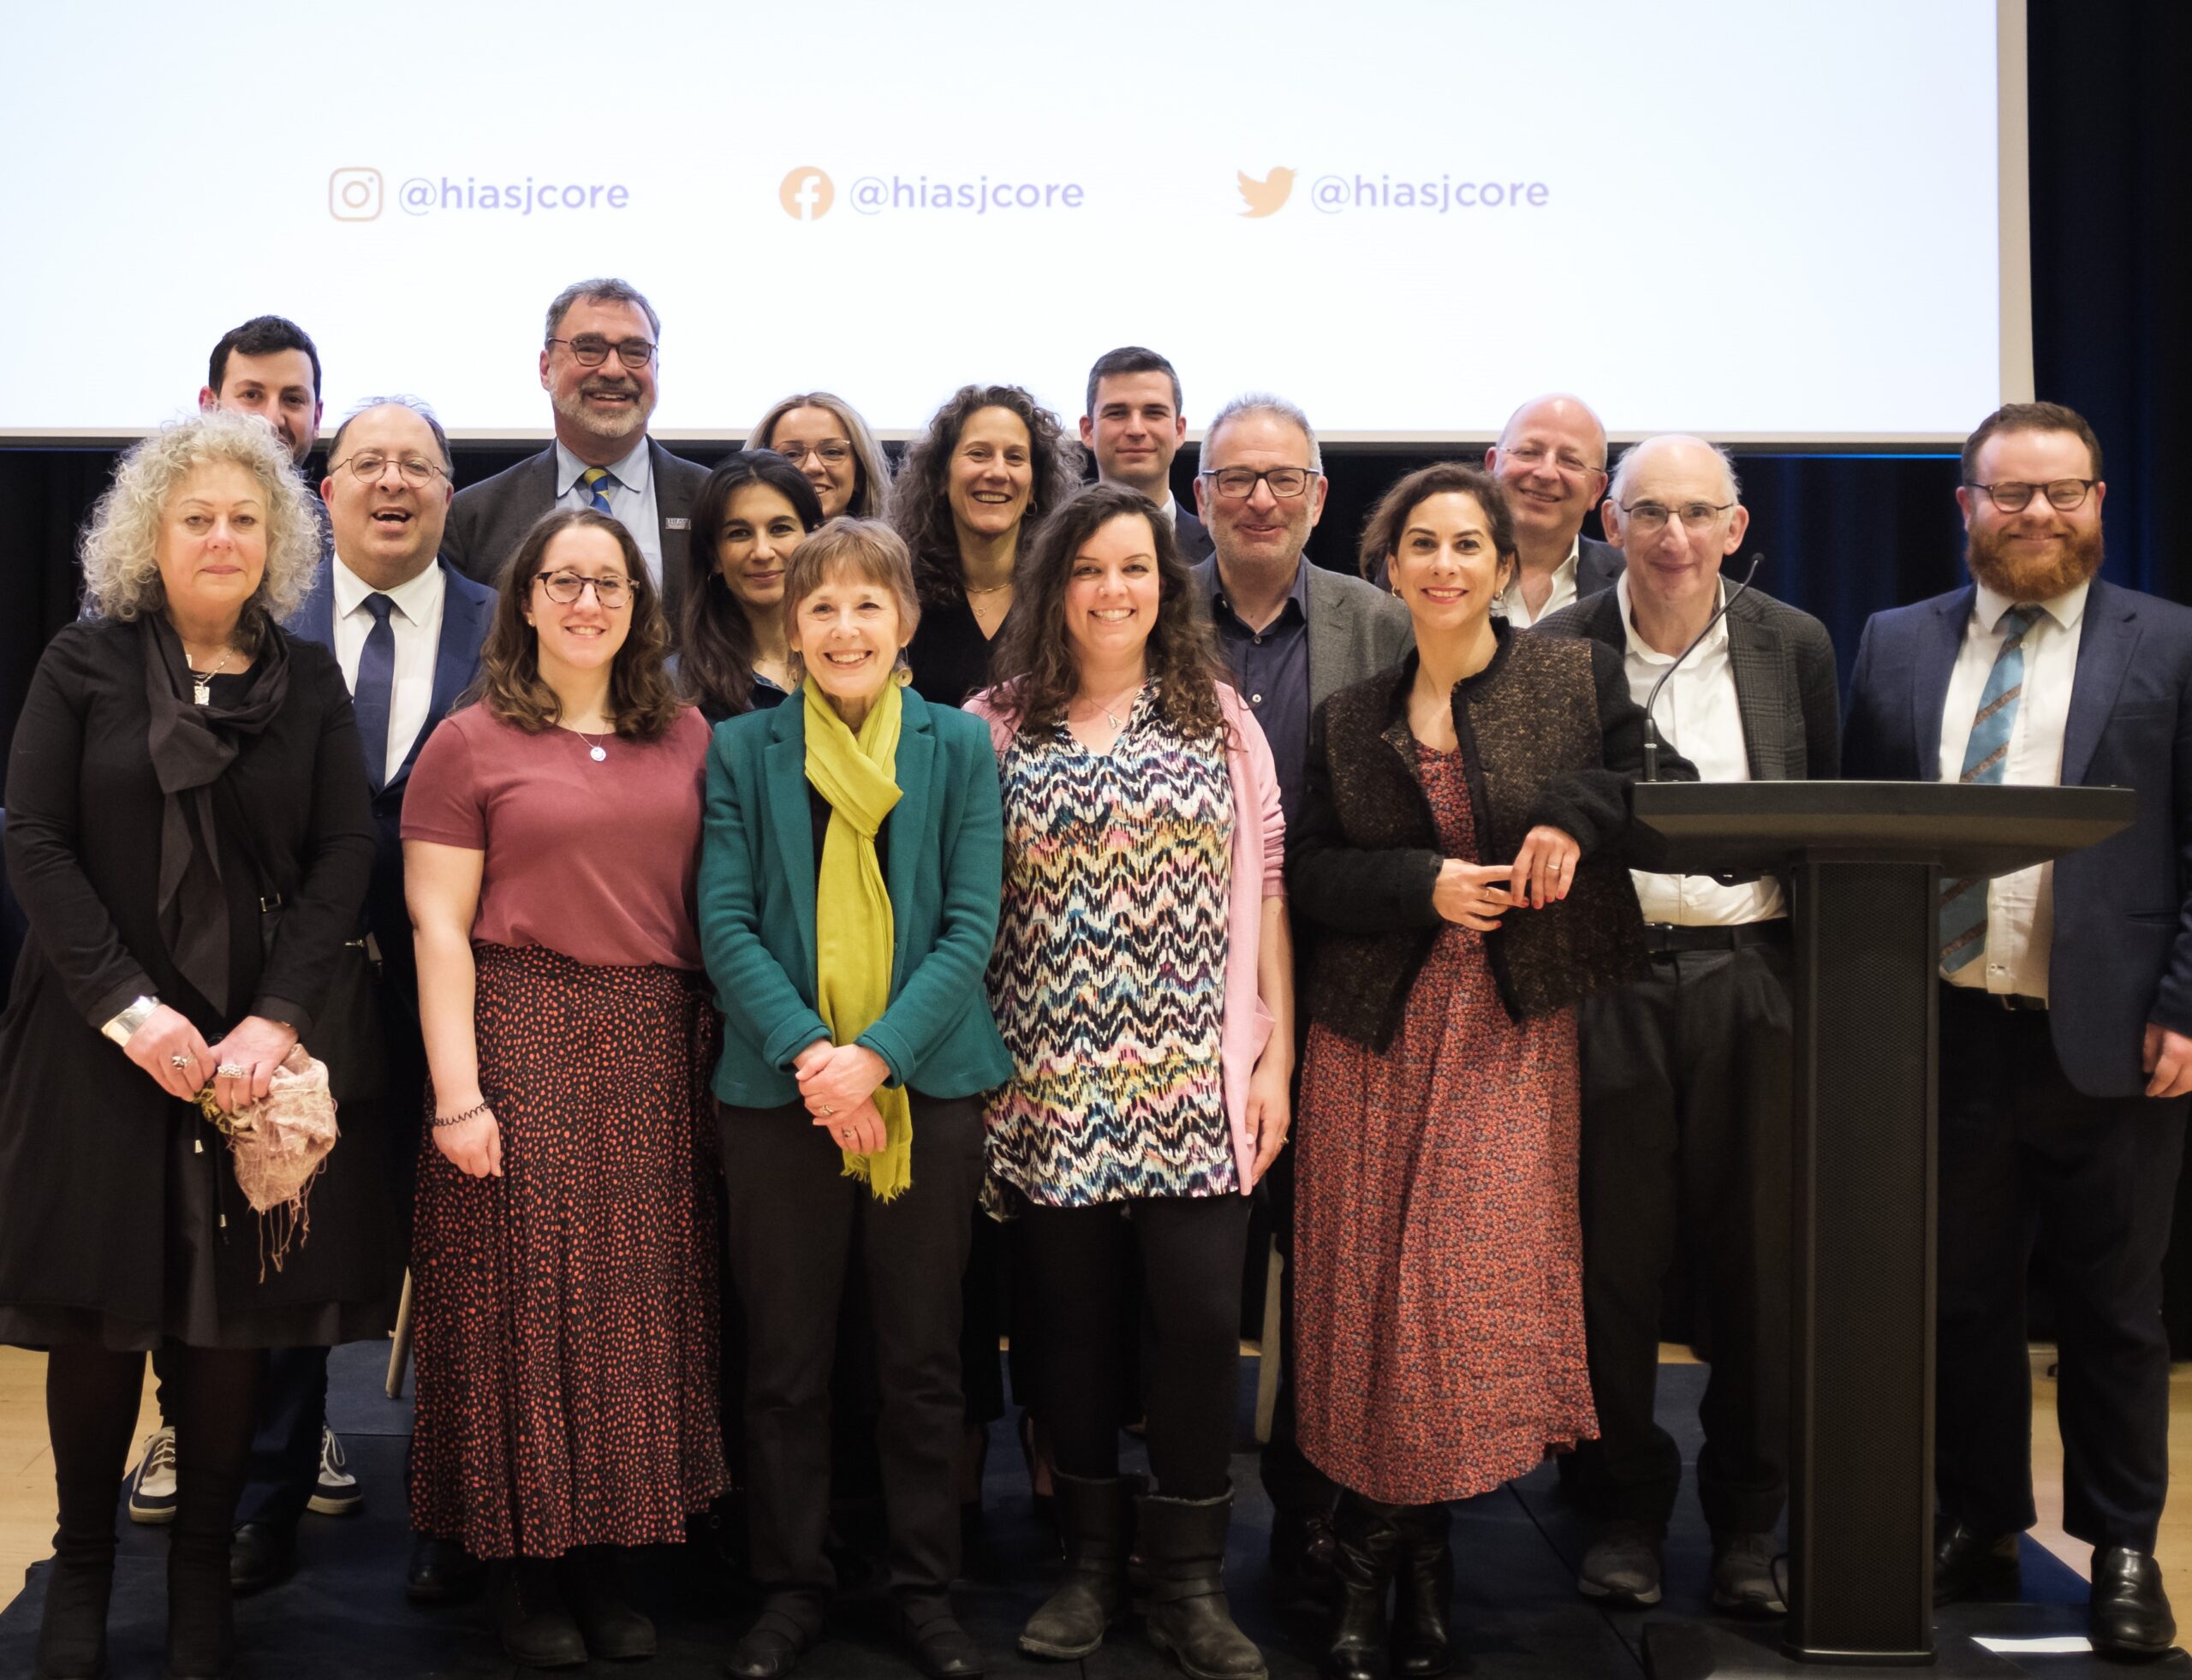 The HIAS+JCORE team stand on stage at JW3, at the launch event held in March 2023.